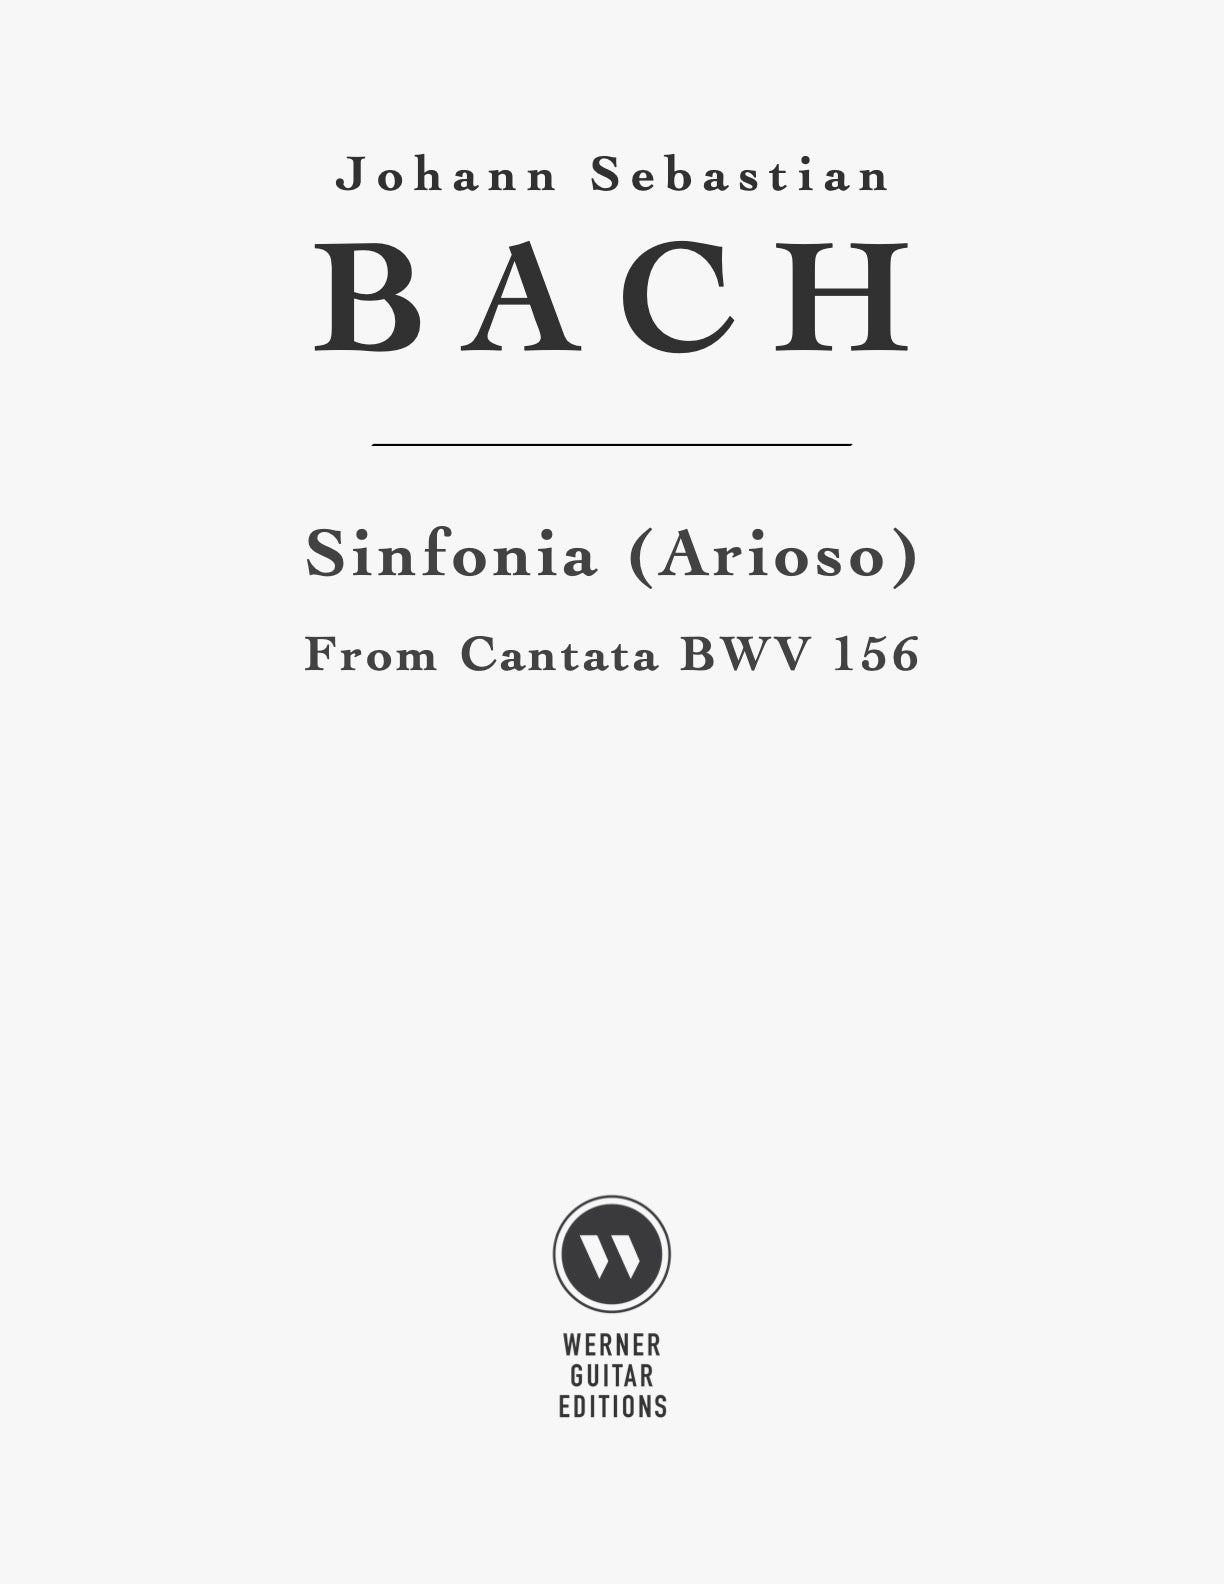 Sinfonia (Arioso) from BWV 156 by Bach 